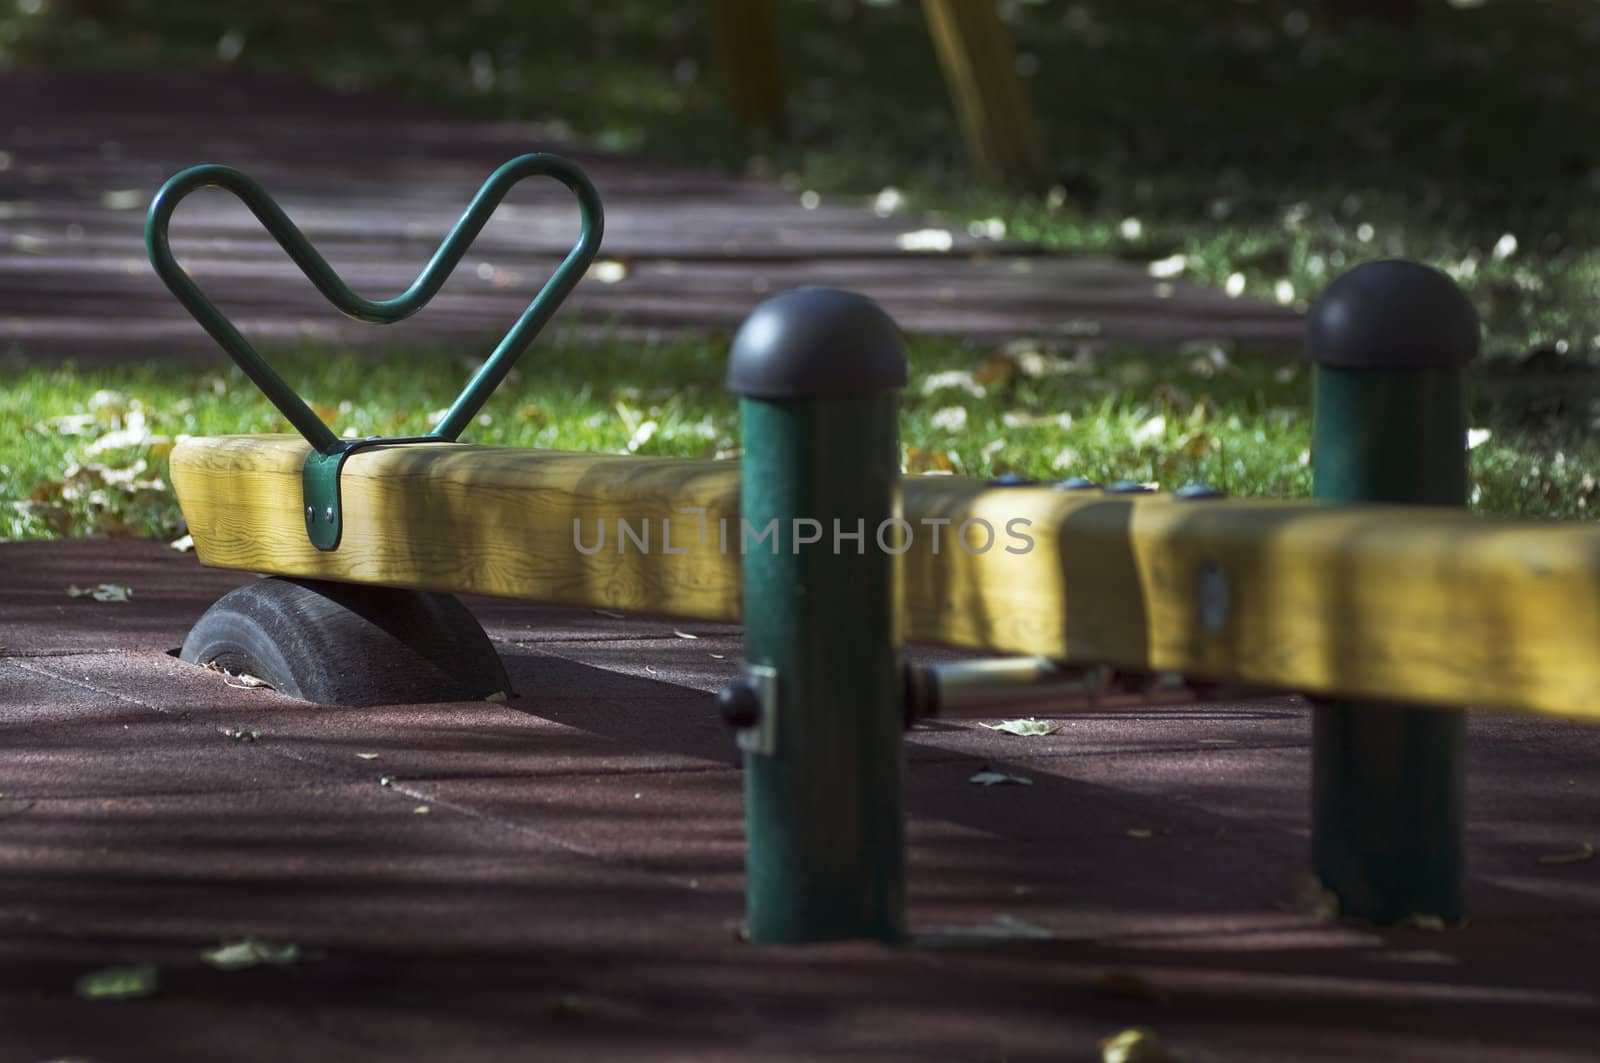 Seesaw in a park in a beautiful afternoon light
